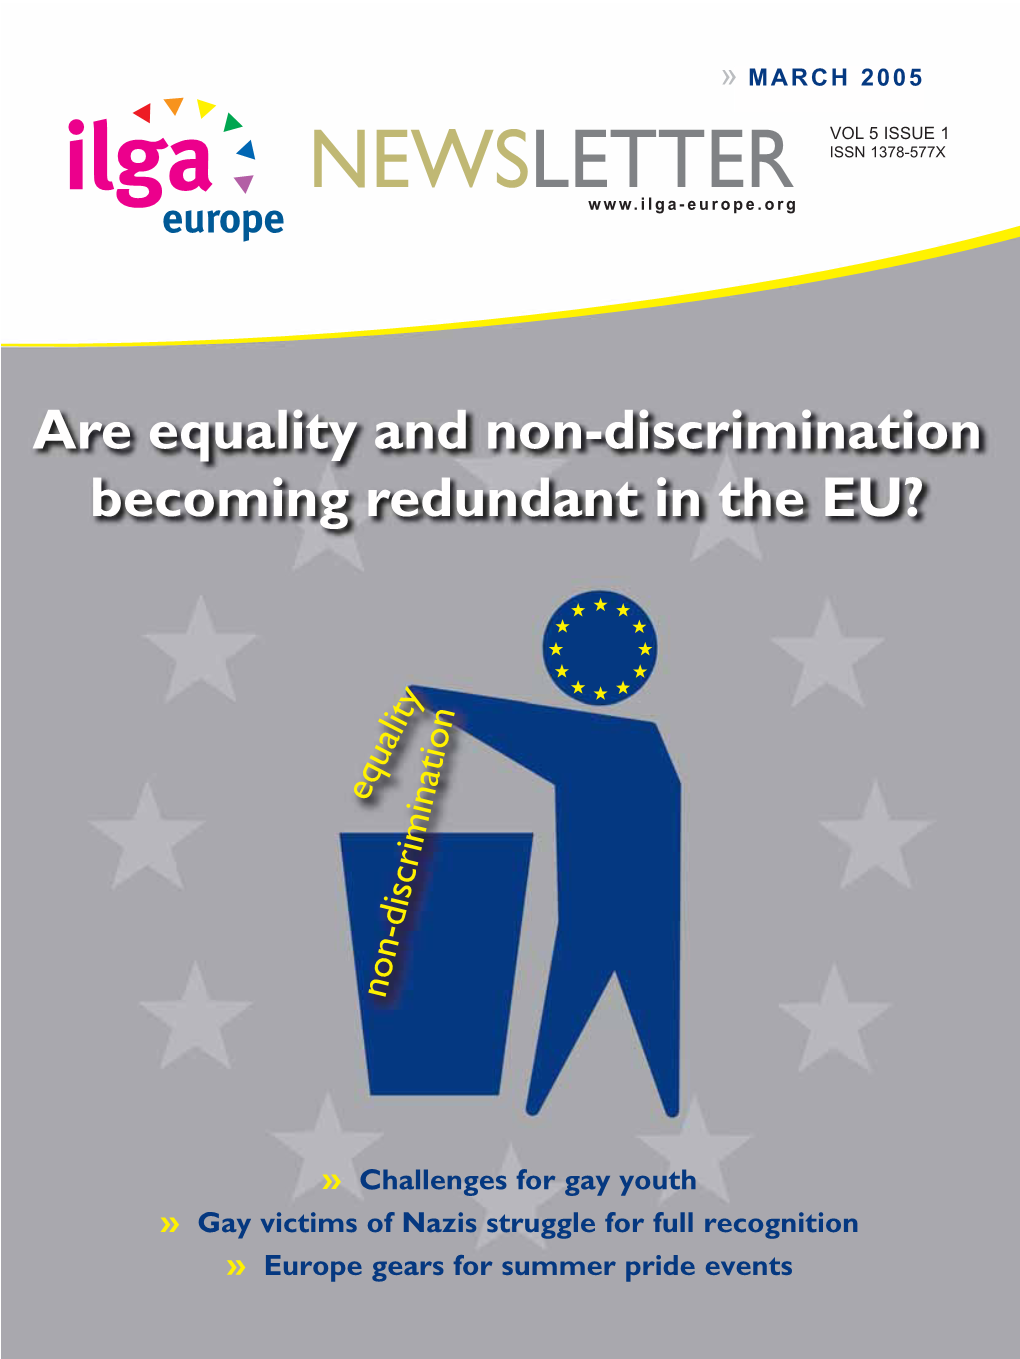 Are Equality and Non-Discrimination Becoming Redundant in the EU?